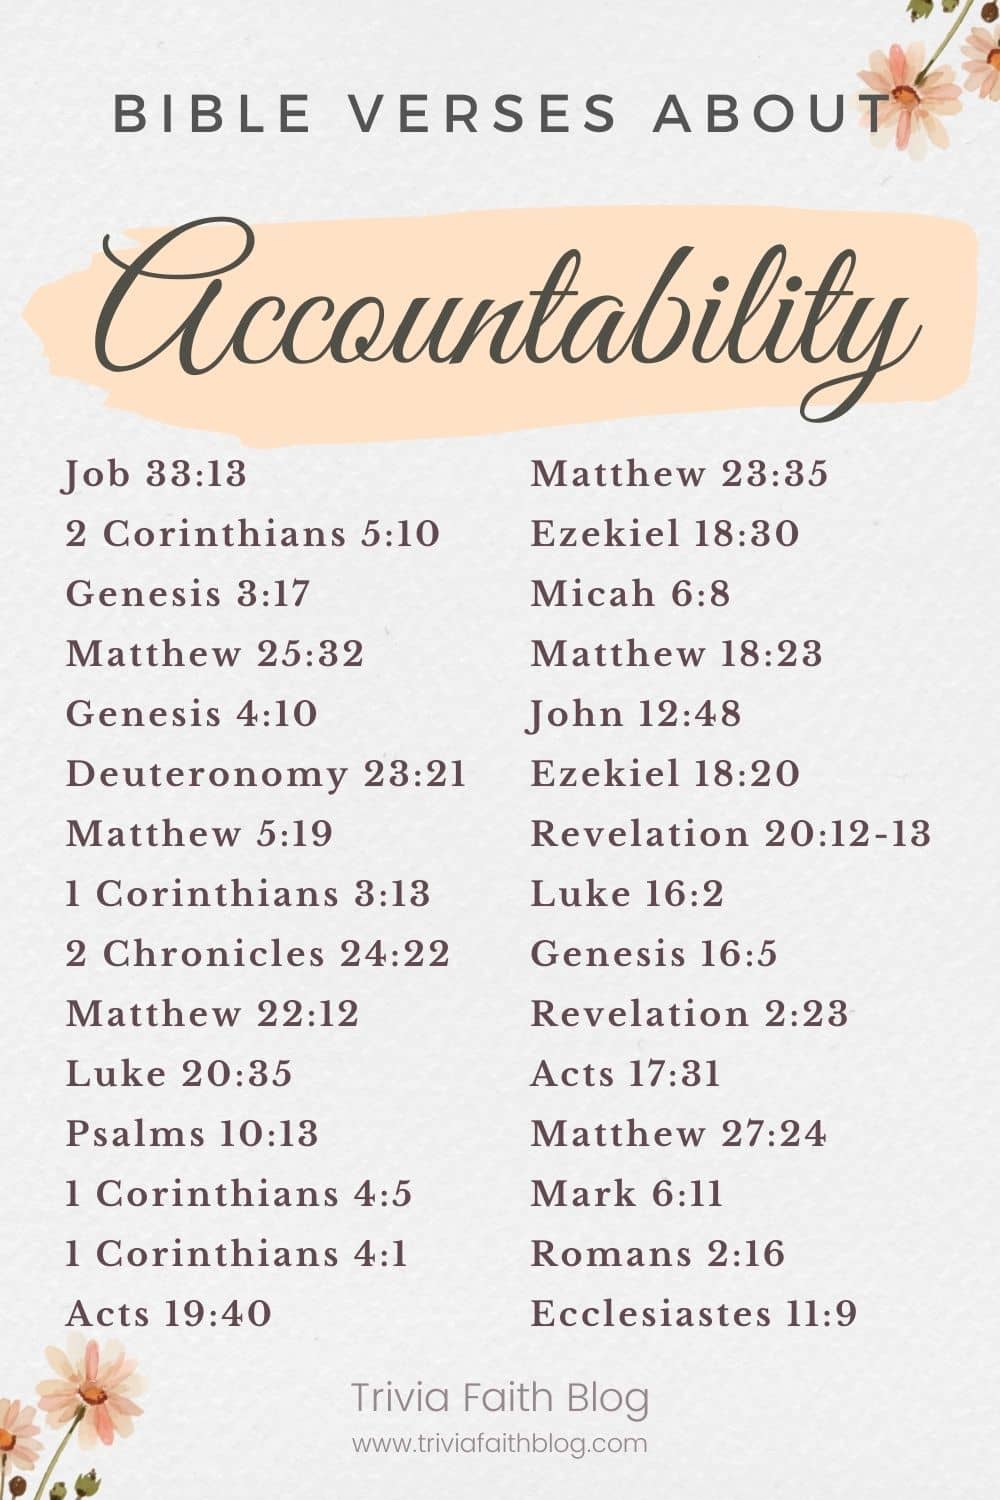 Bible verses about accountability